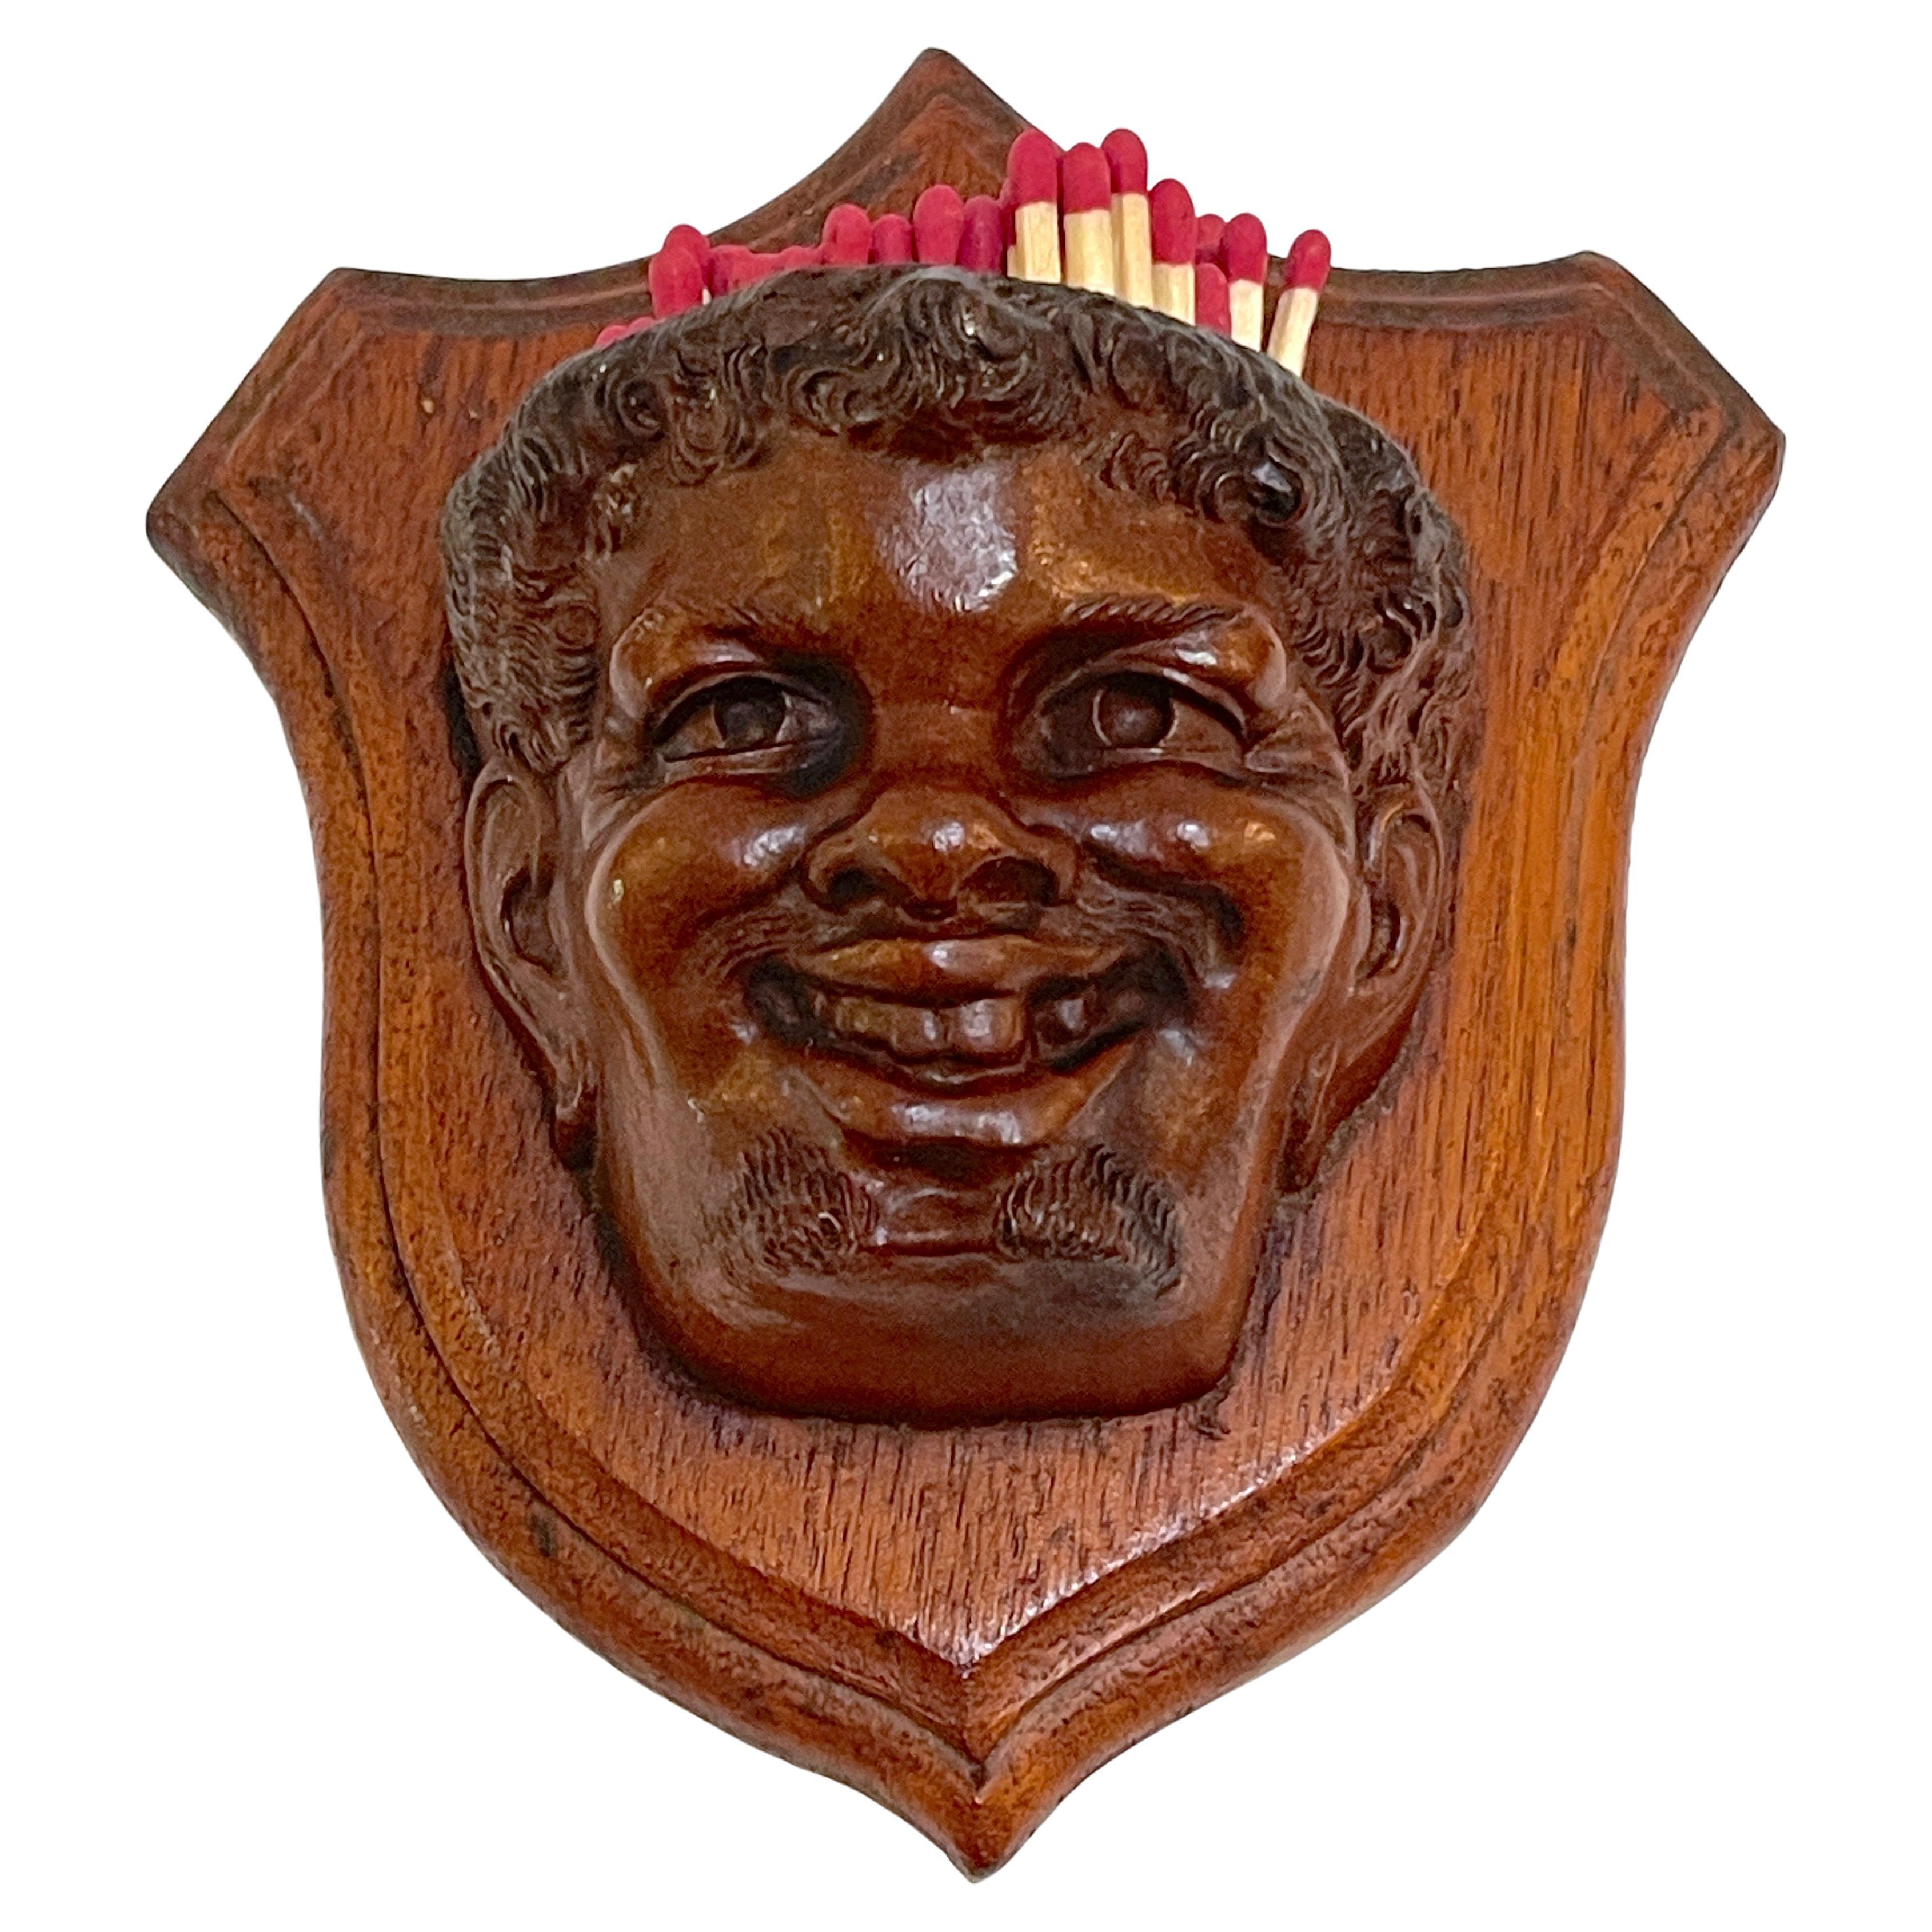 Black Forrest Carved Black Walnut Toothless Man Motif Hanging Match Holder
Swiss, Later 19th Century 

A whimsical and intricately hand-carved piece from the Black Forest region, this hanging match holder features a realistically carved black walnut